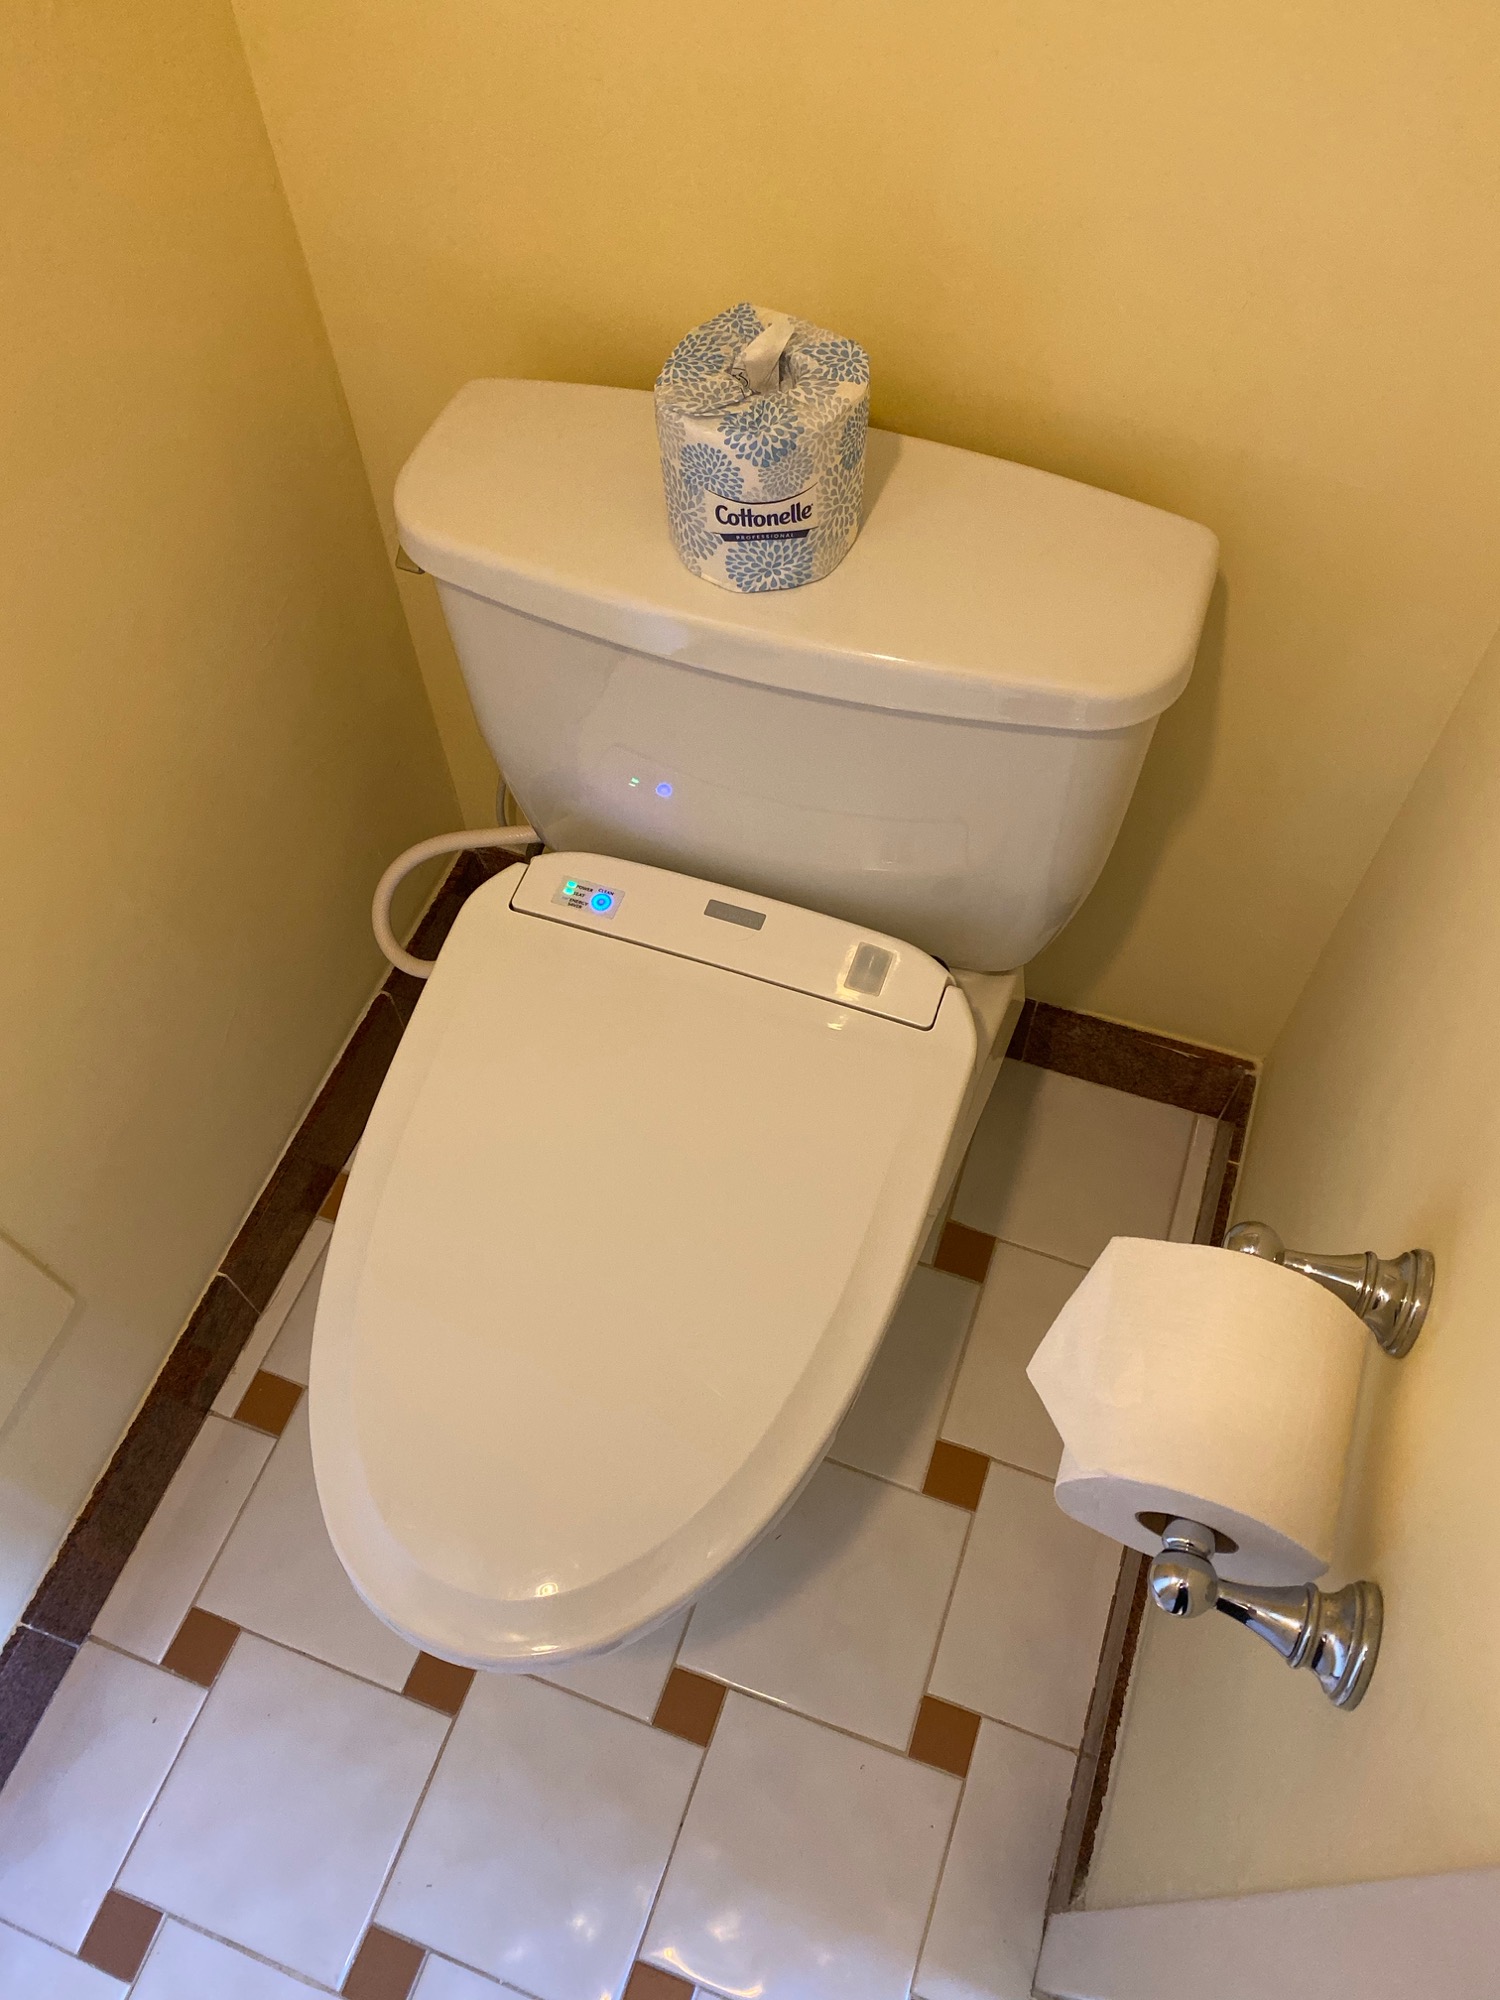 a toilet with a roll of toilet paper on the tank